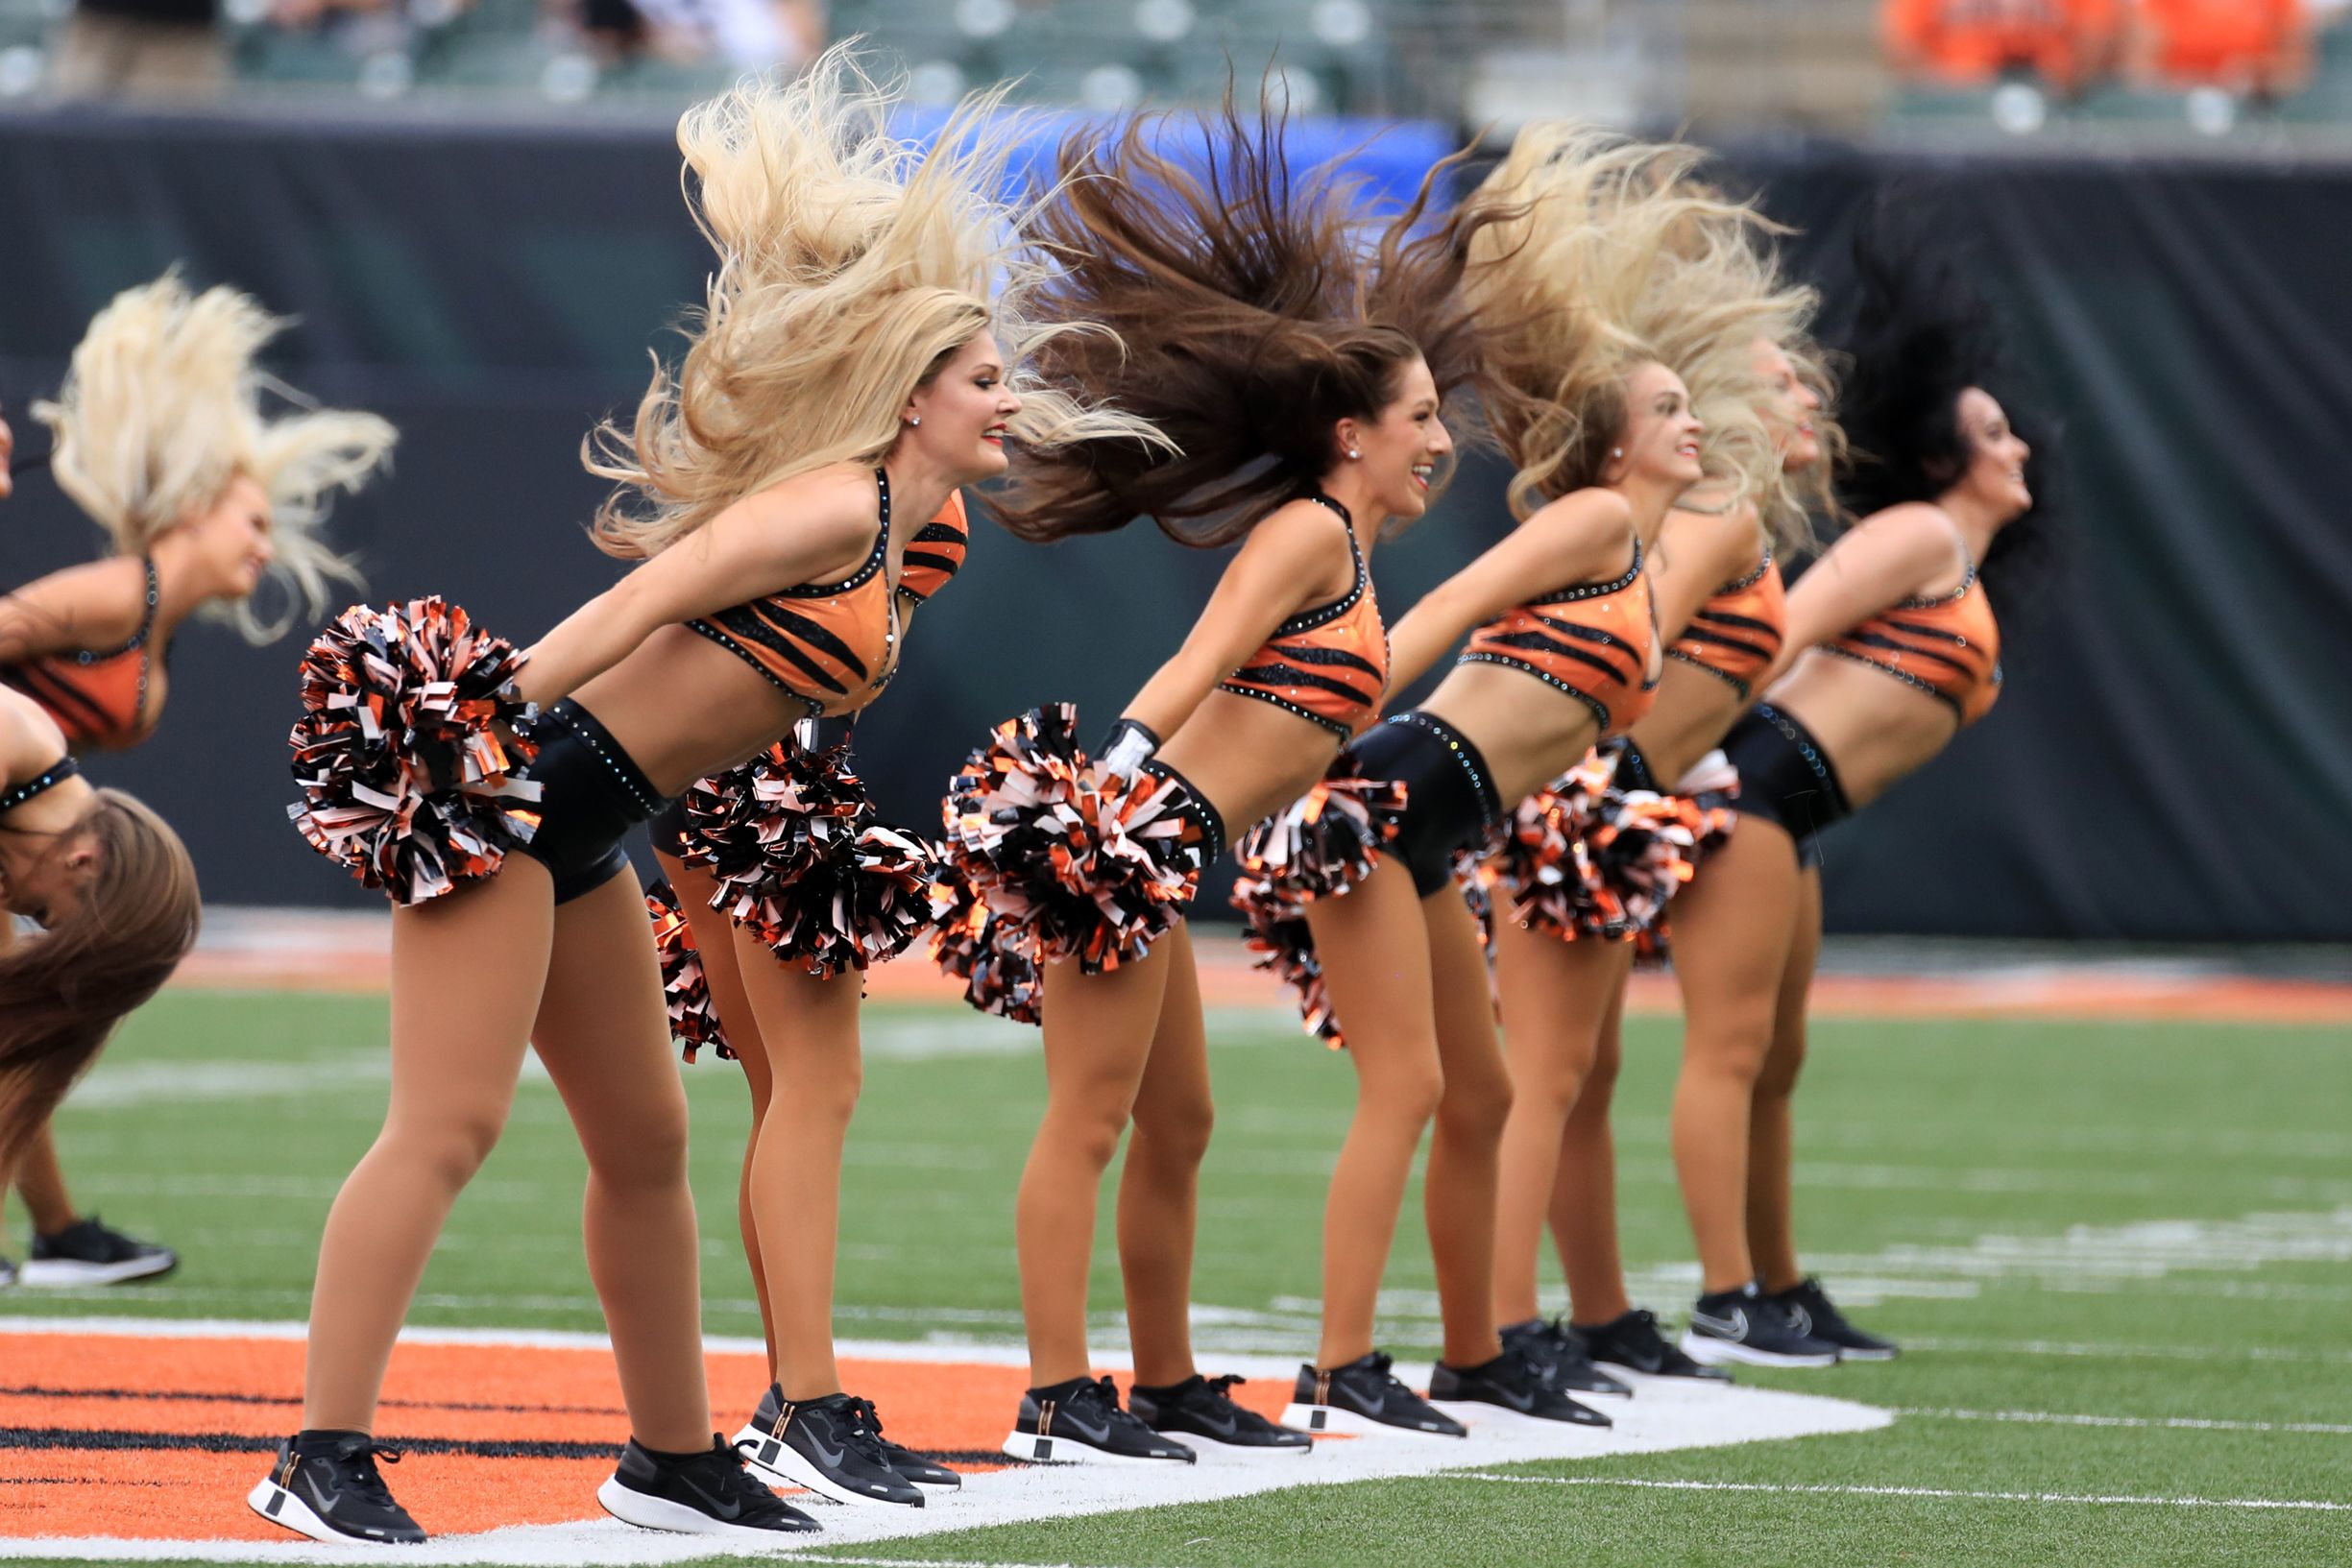 NFL cheer uniforms have been scrutinized since the 1970s, but